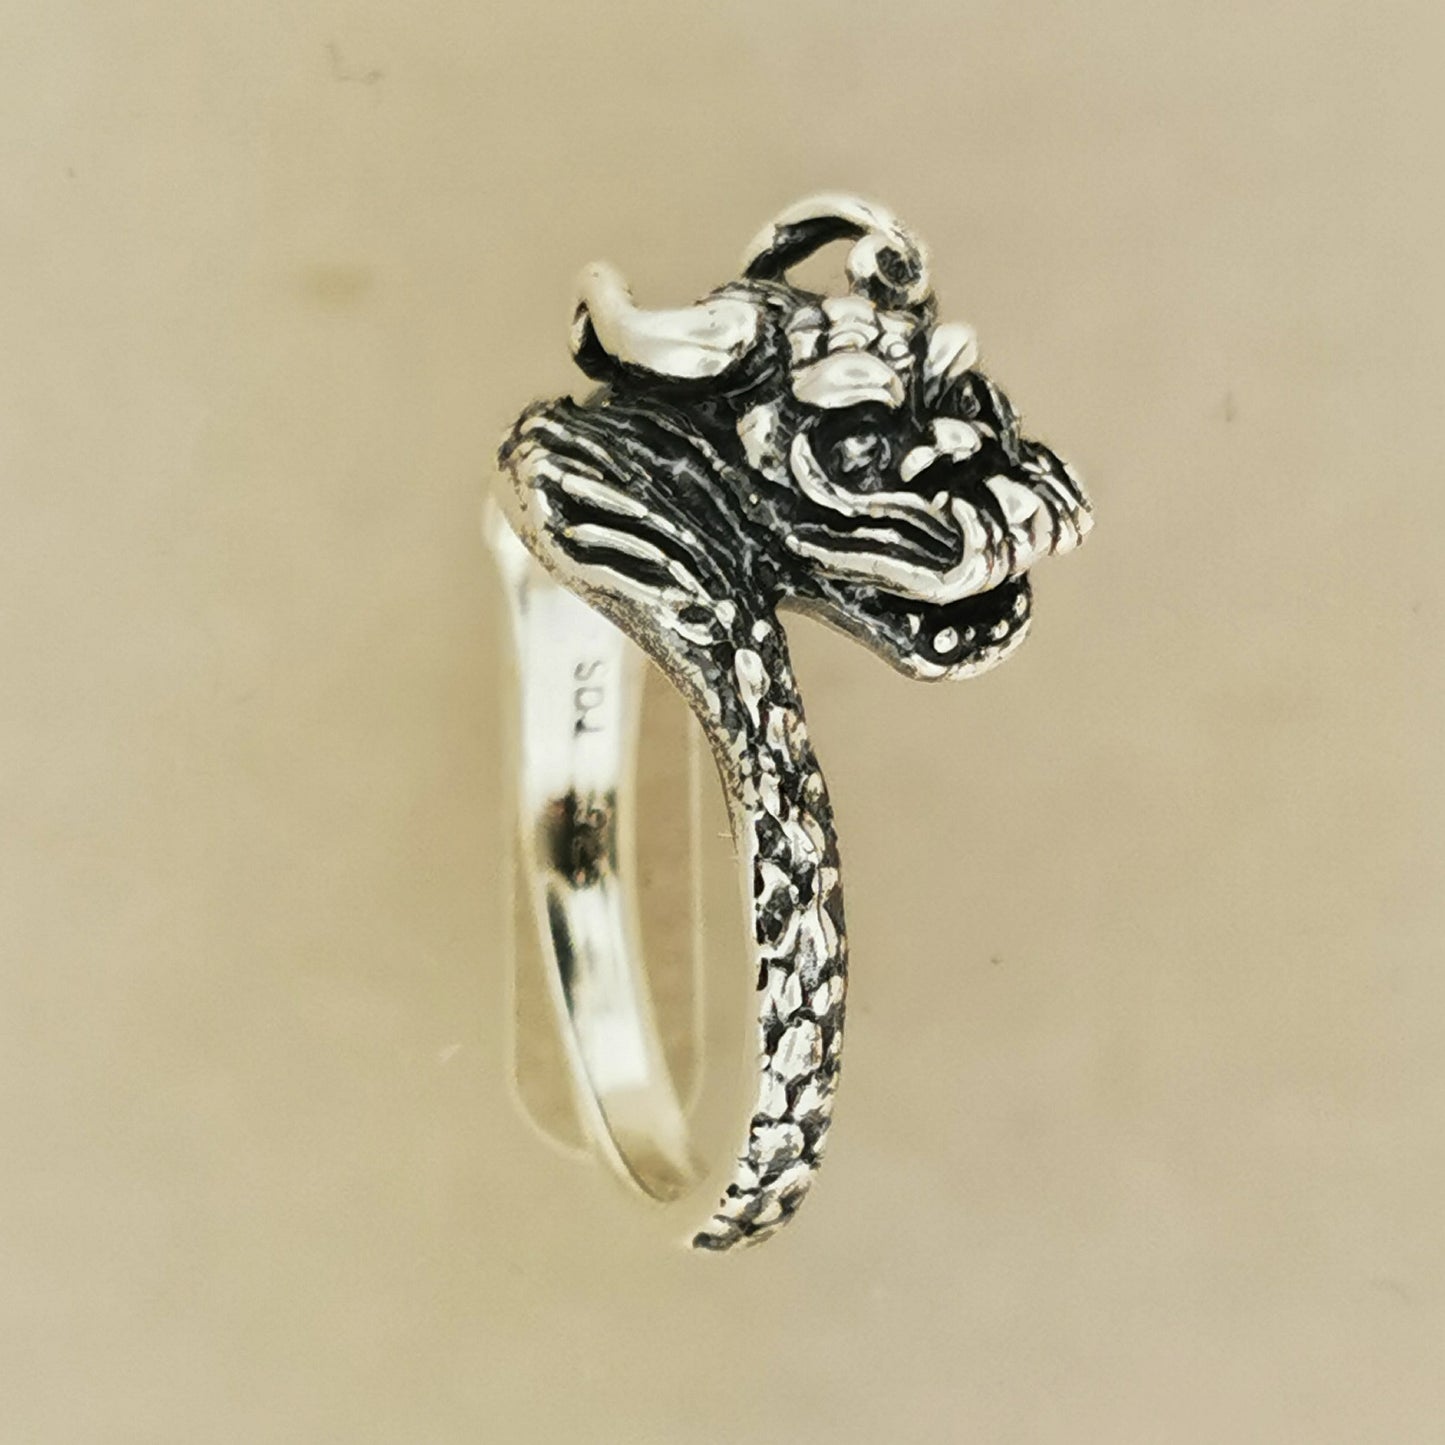 Chinese Dragon Ring in Sterling Silver or Antique Bronze